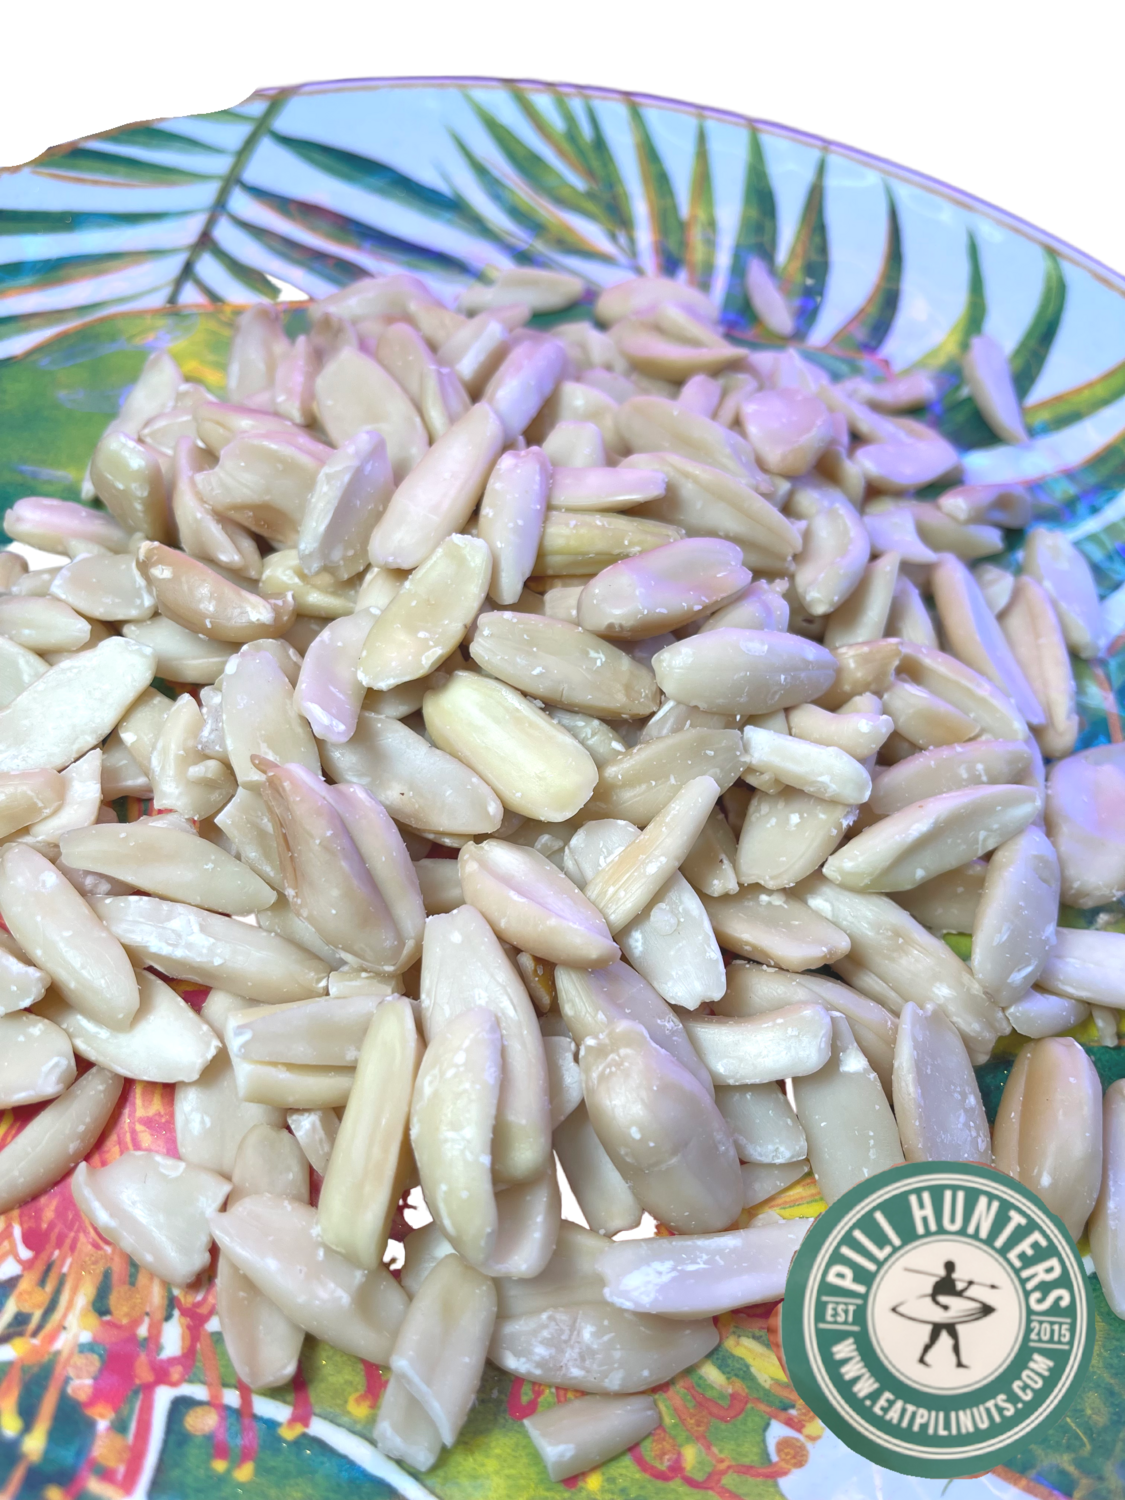 8 oz Shelled Sprouted Pili Nuts by Pili Hunters -- Good for all Birds!